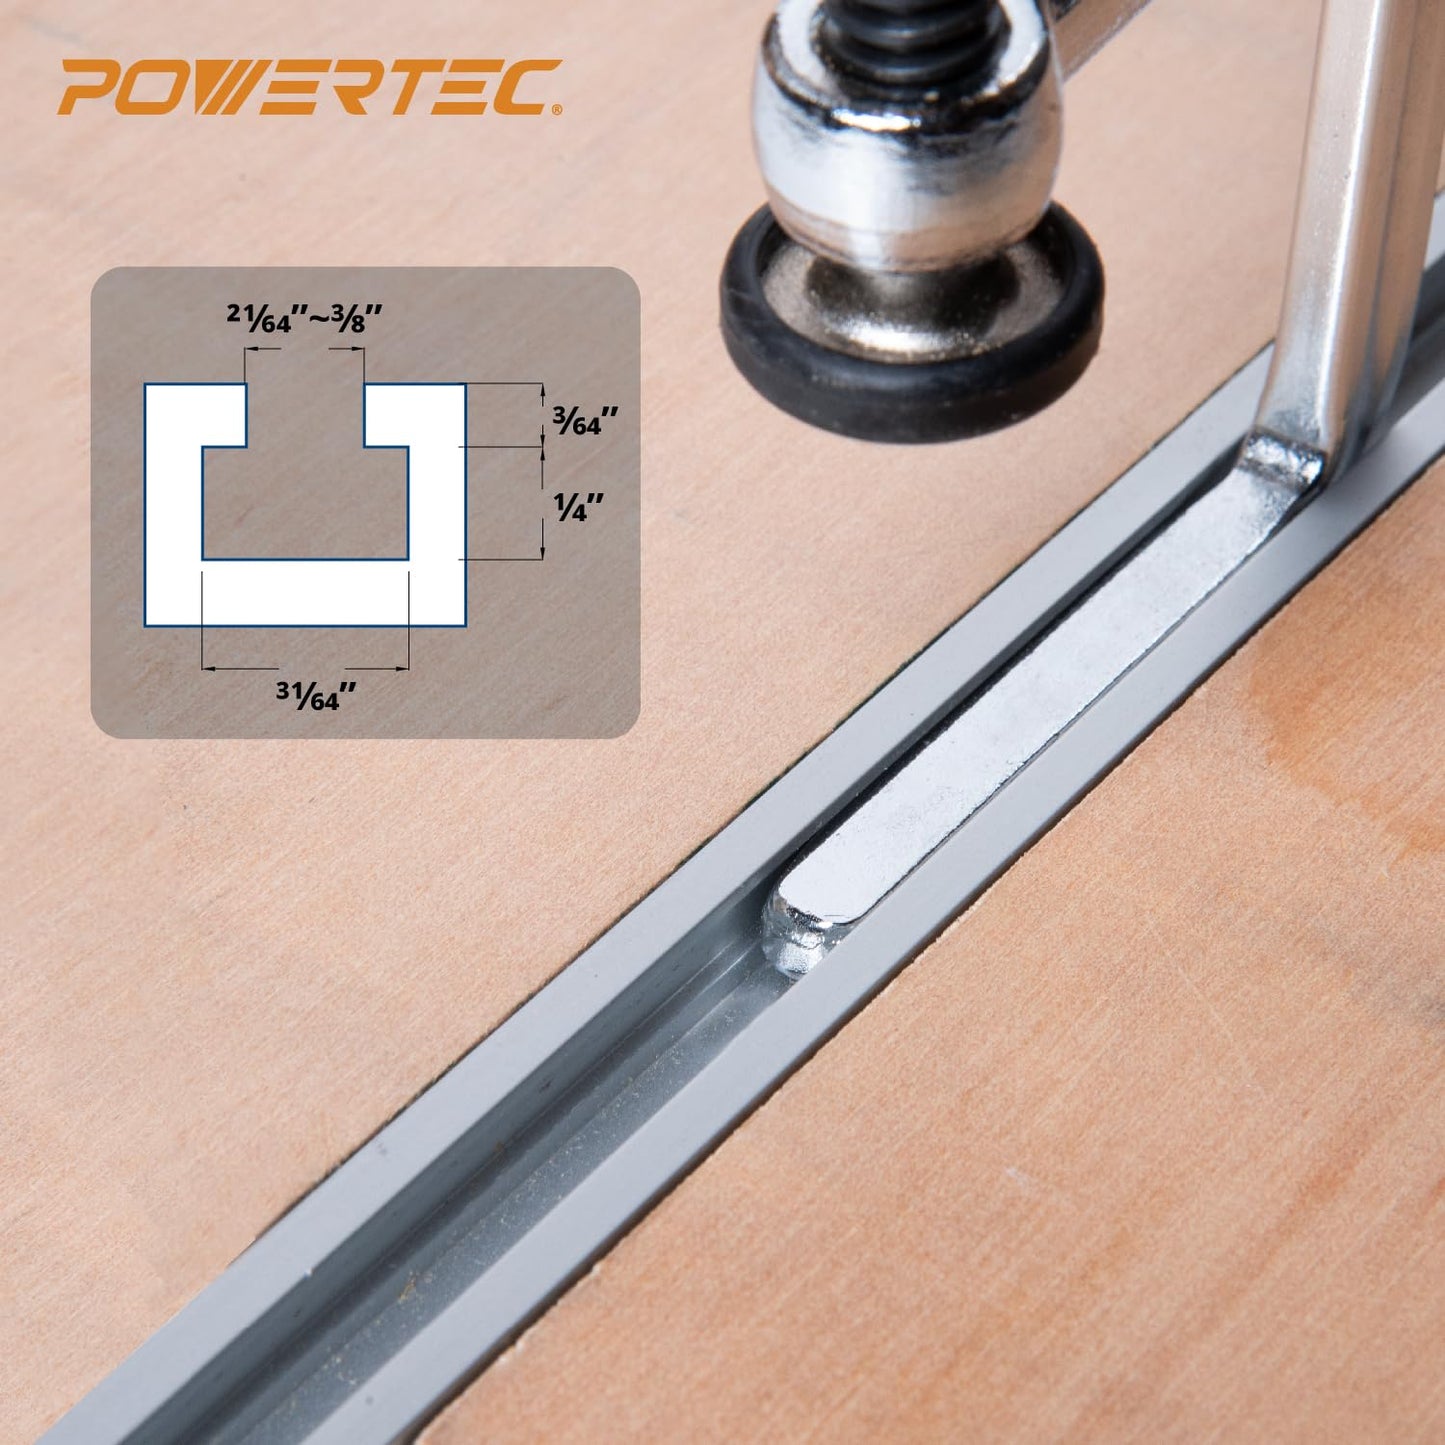 POWERTEC 71410 Quick Screw Guide Rail Clamp for MFT Table and Track Saw Guide Rail System, 5-3/8” Capacity x 2-3/8” Throat Depth, 400lbs Clamping